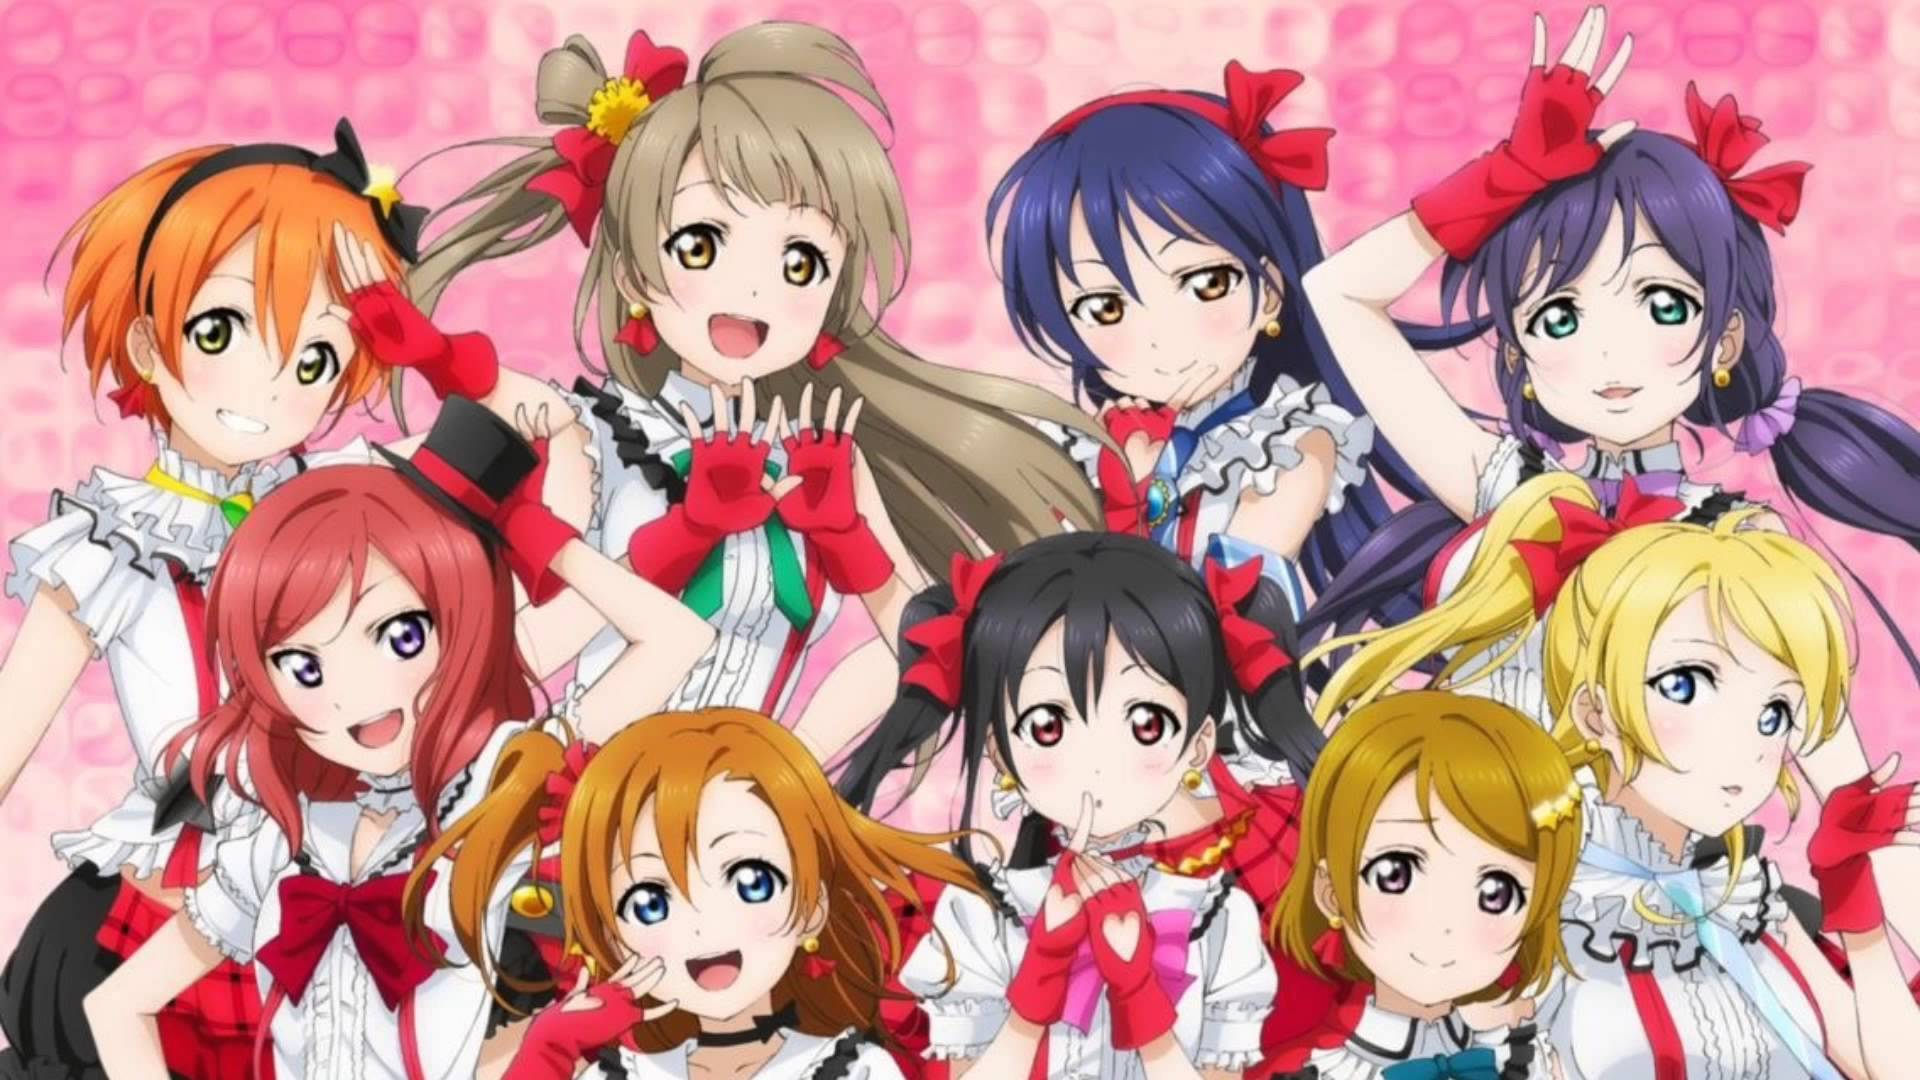 15 Memorable Quotes from Love Live School Idol Project 1920x1080